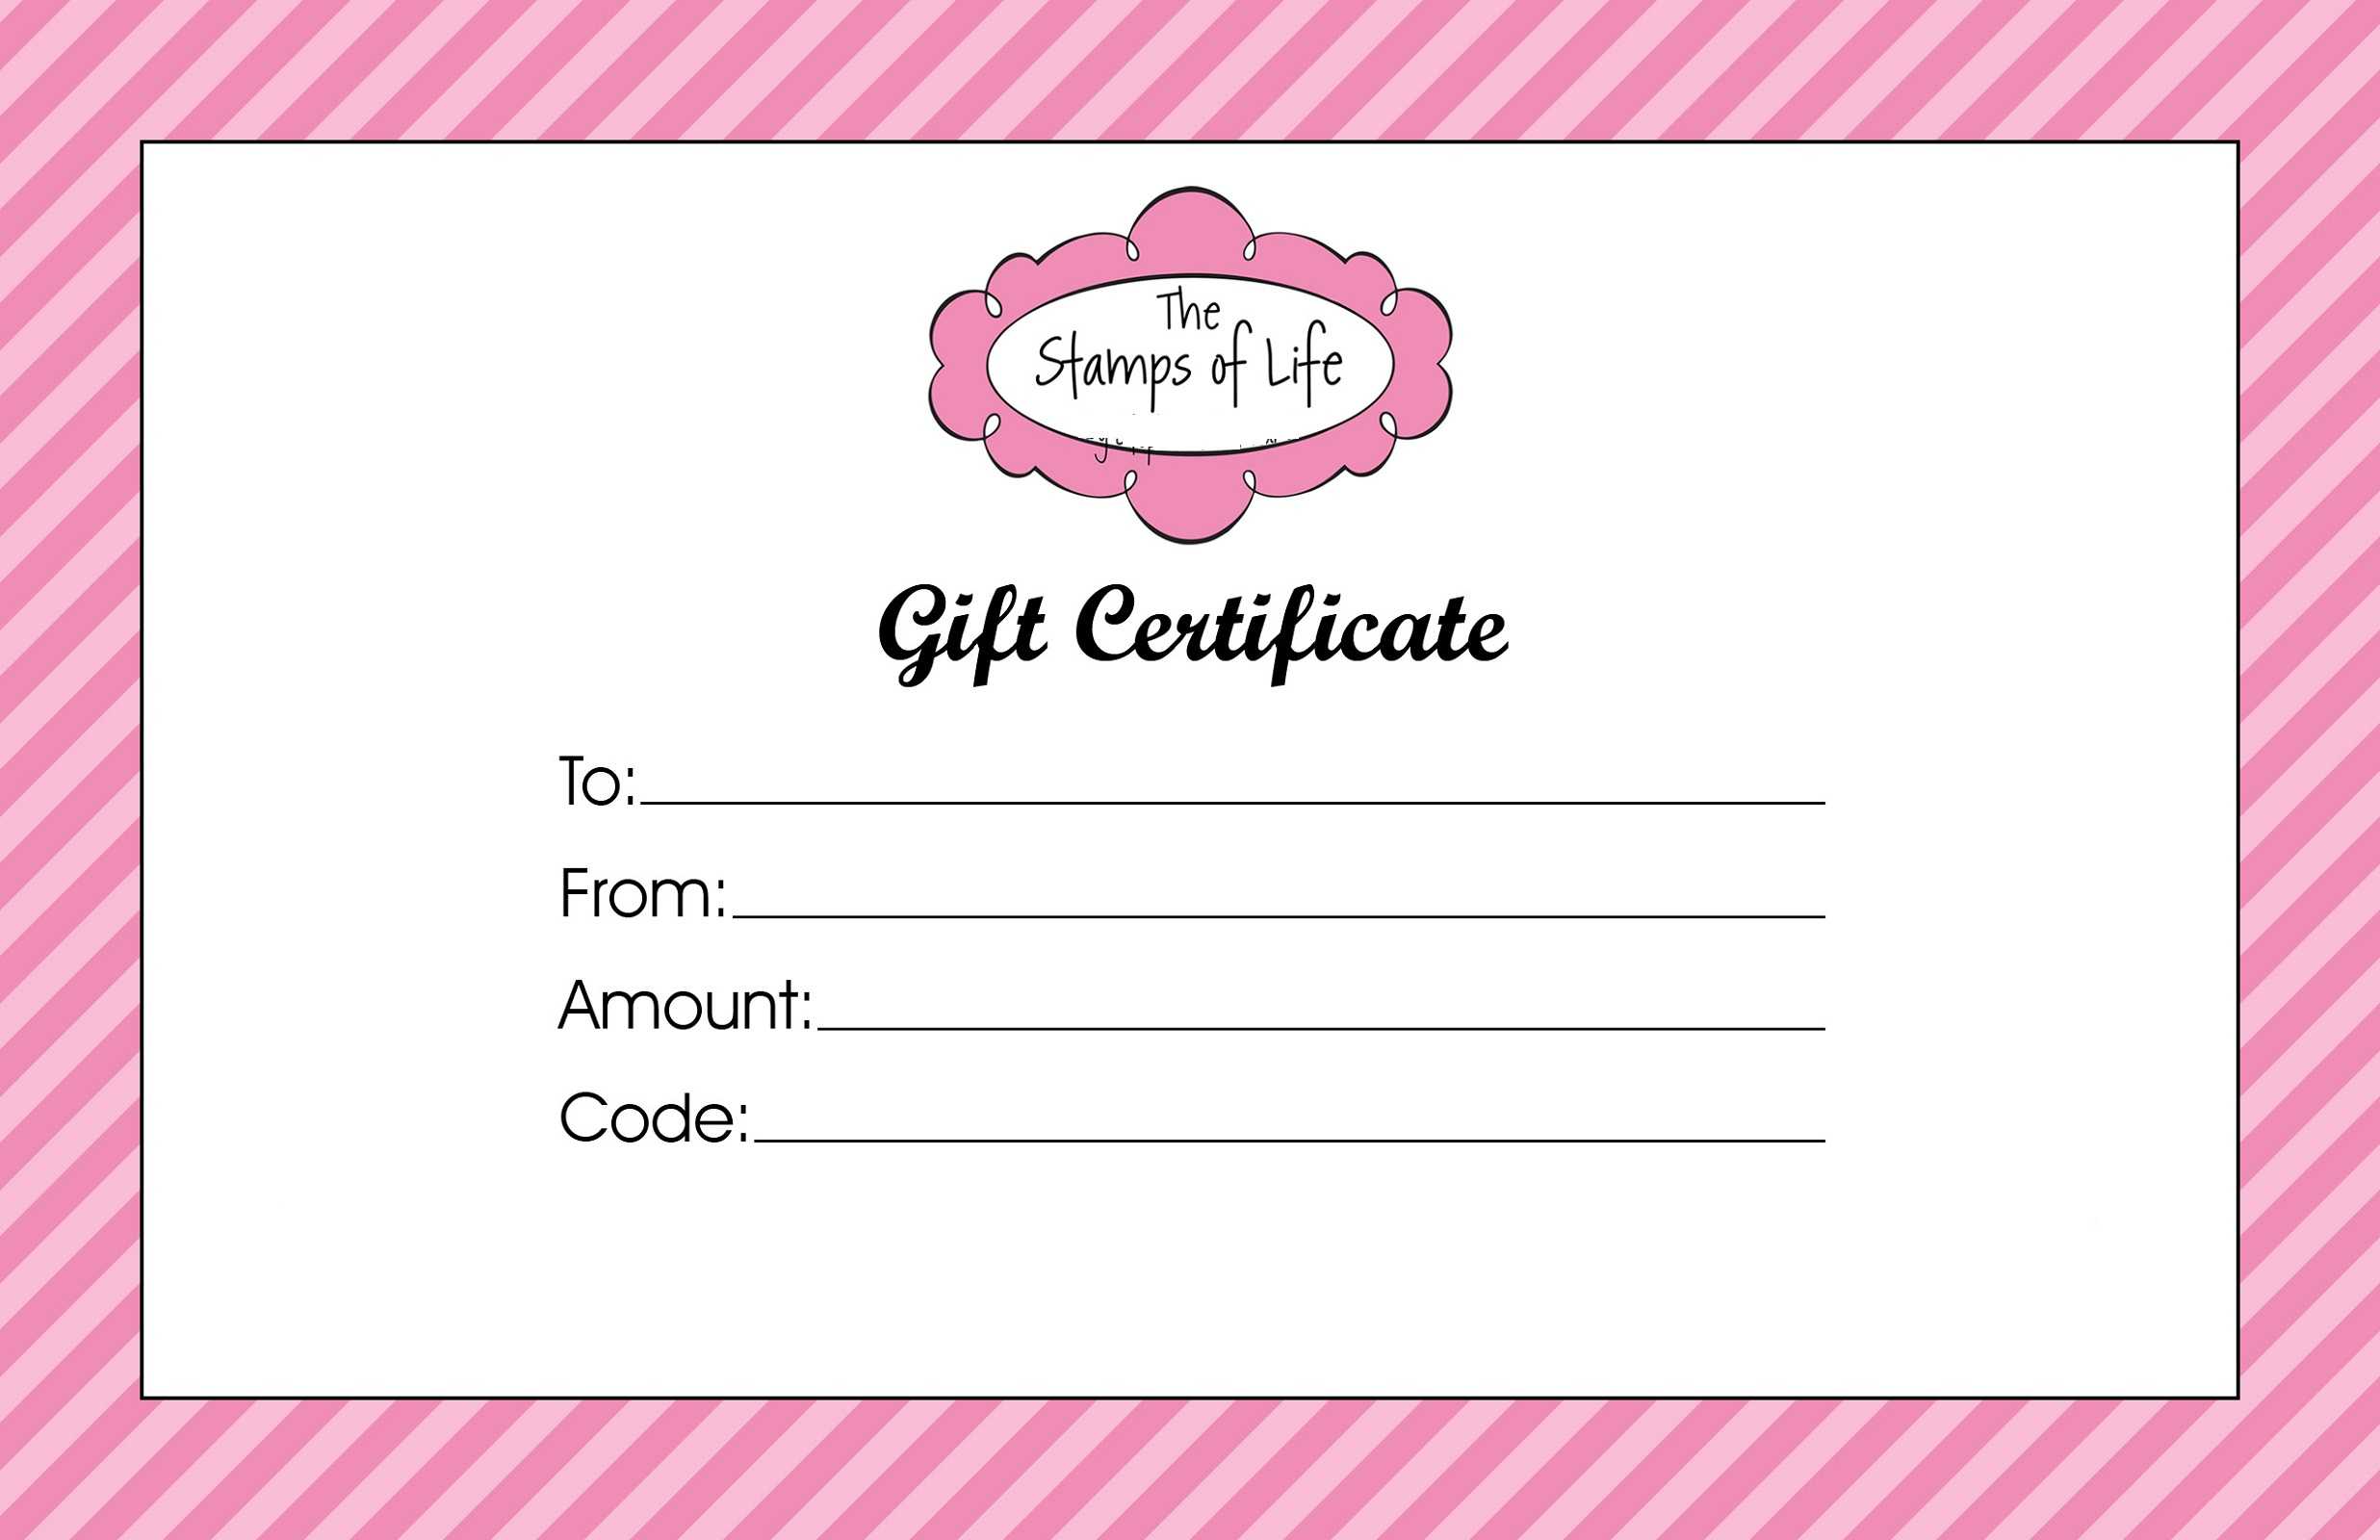 Gift Certificate Templates To Print | Activity Shelter With Regard To Love Certificate Templates